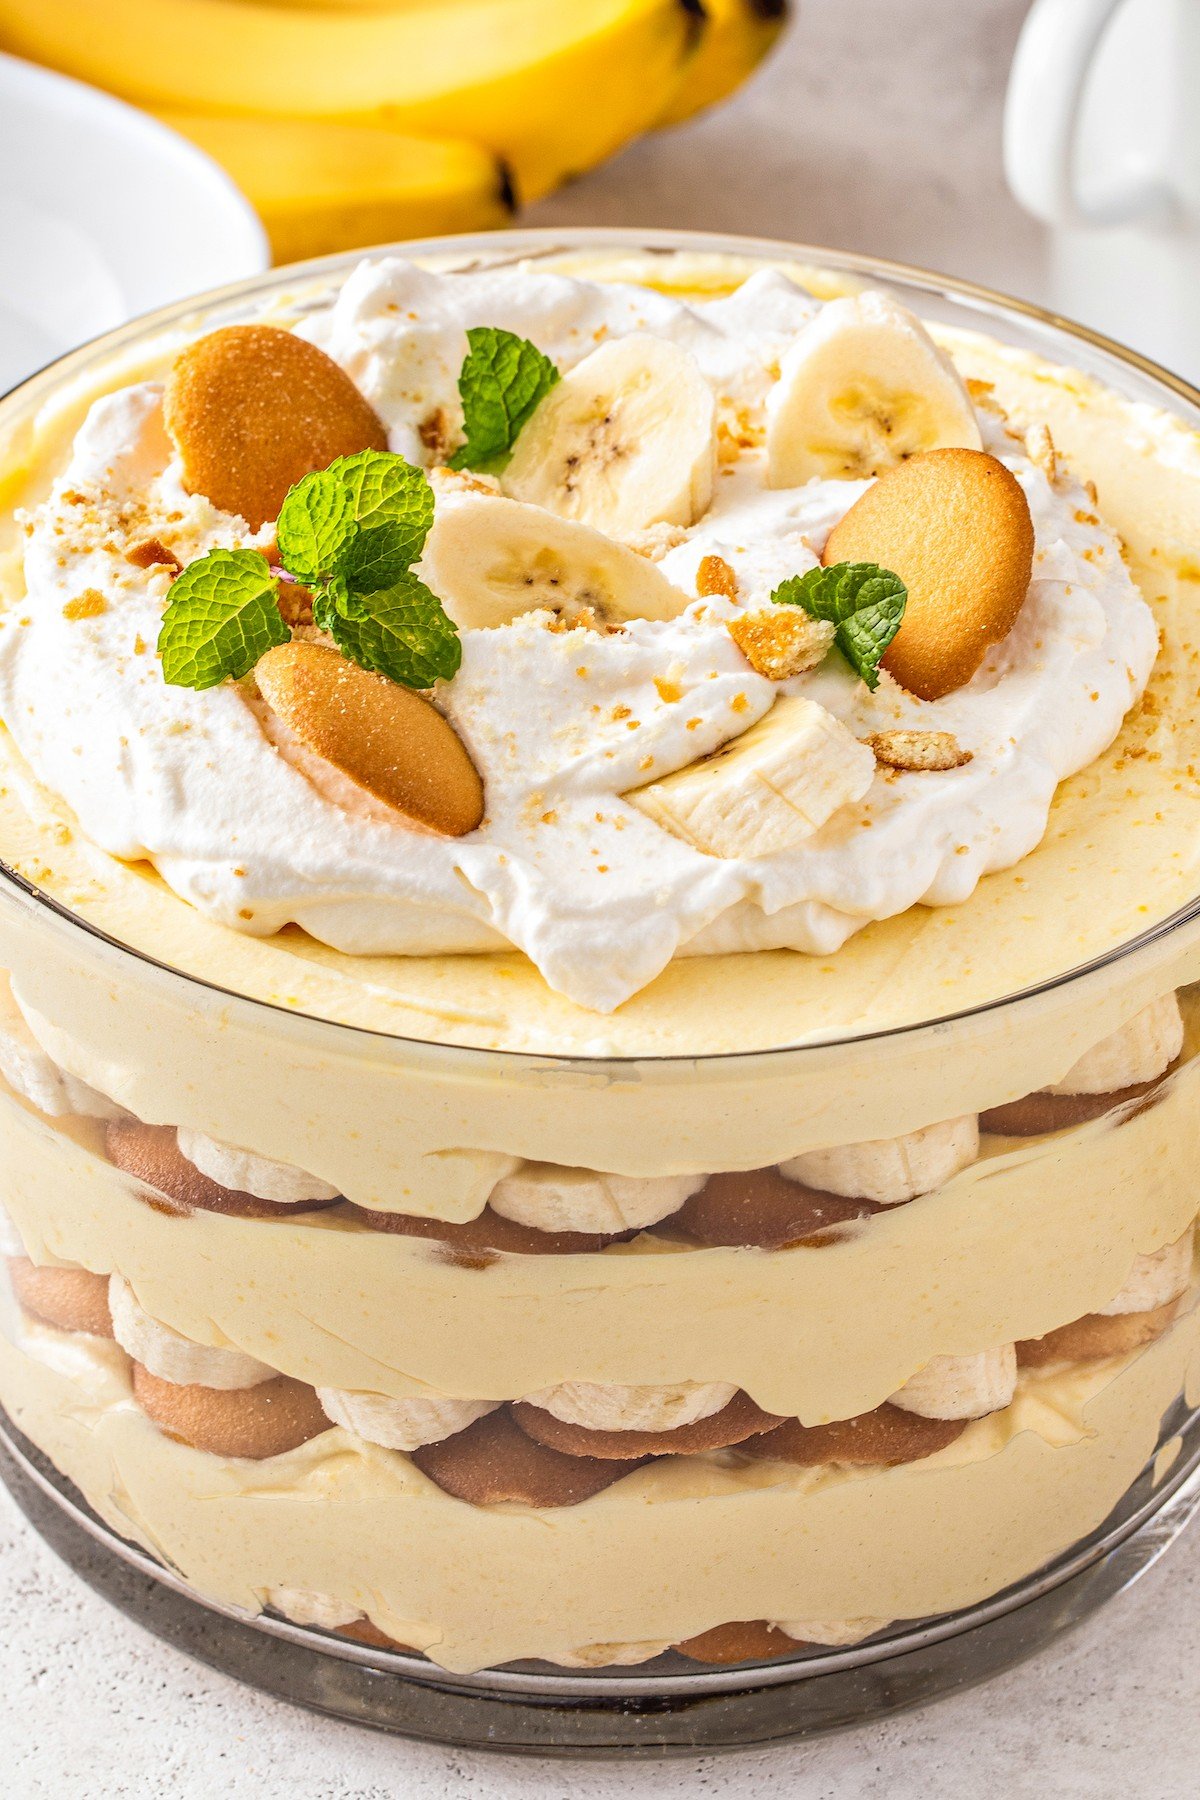 Homemade banana pudding in a glass dish showing off the layers